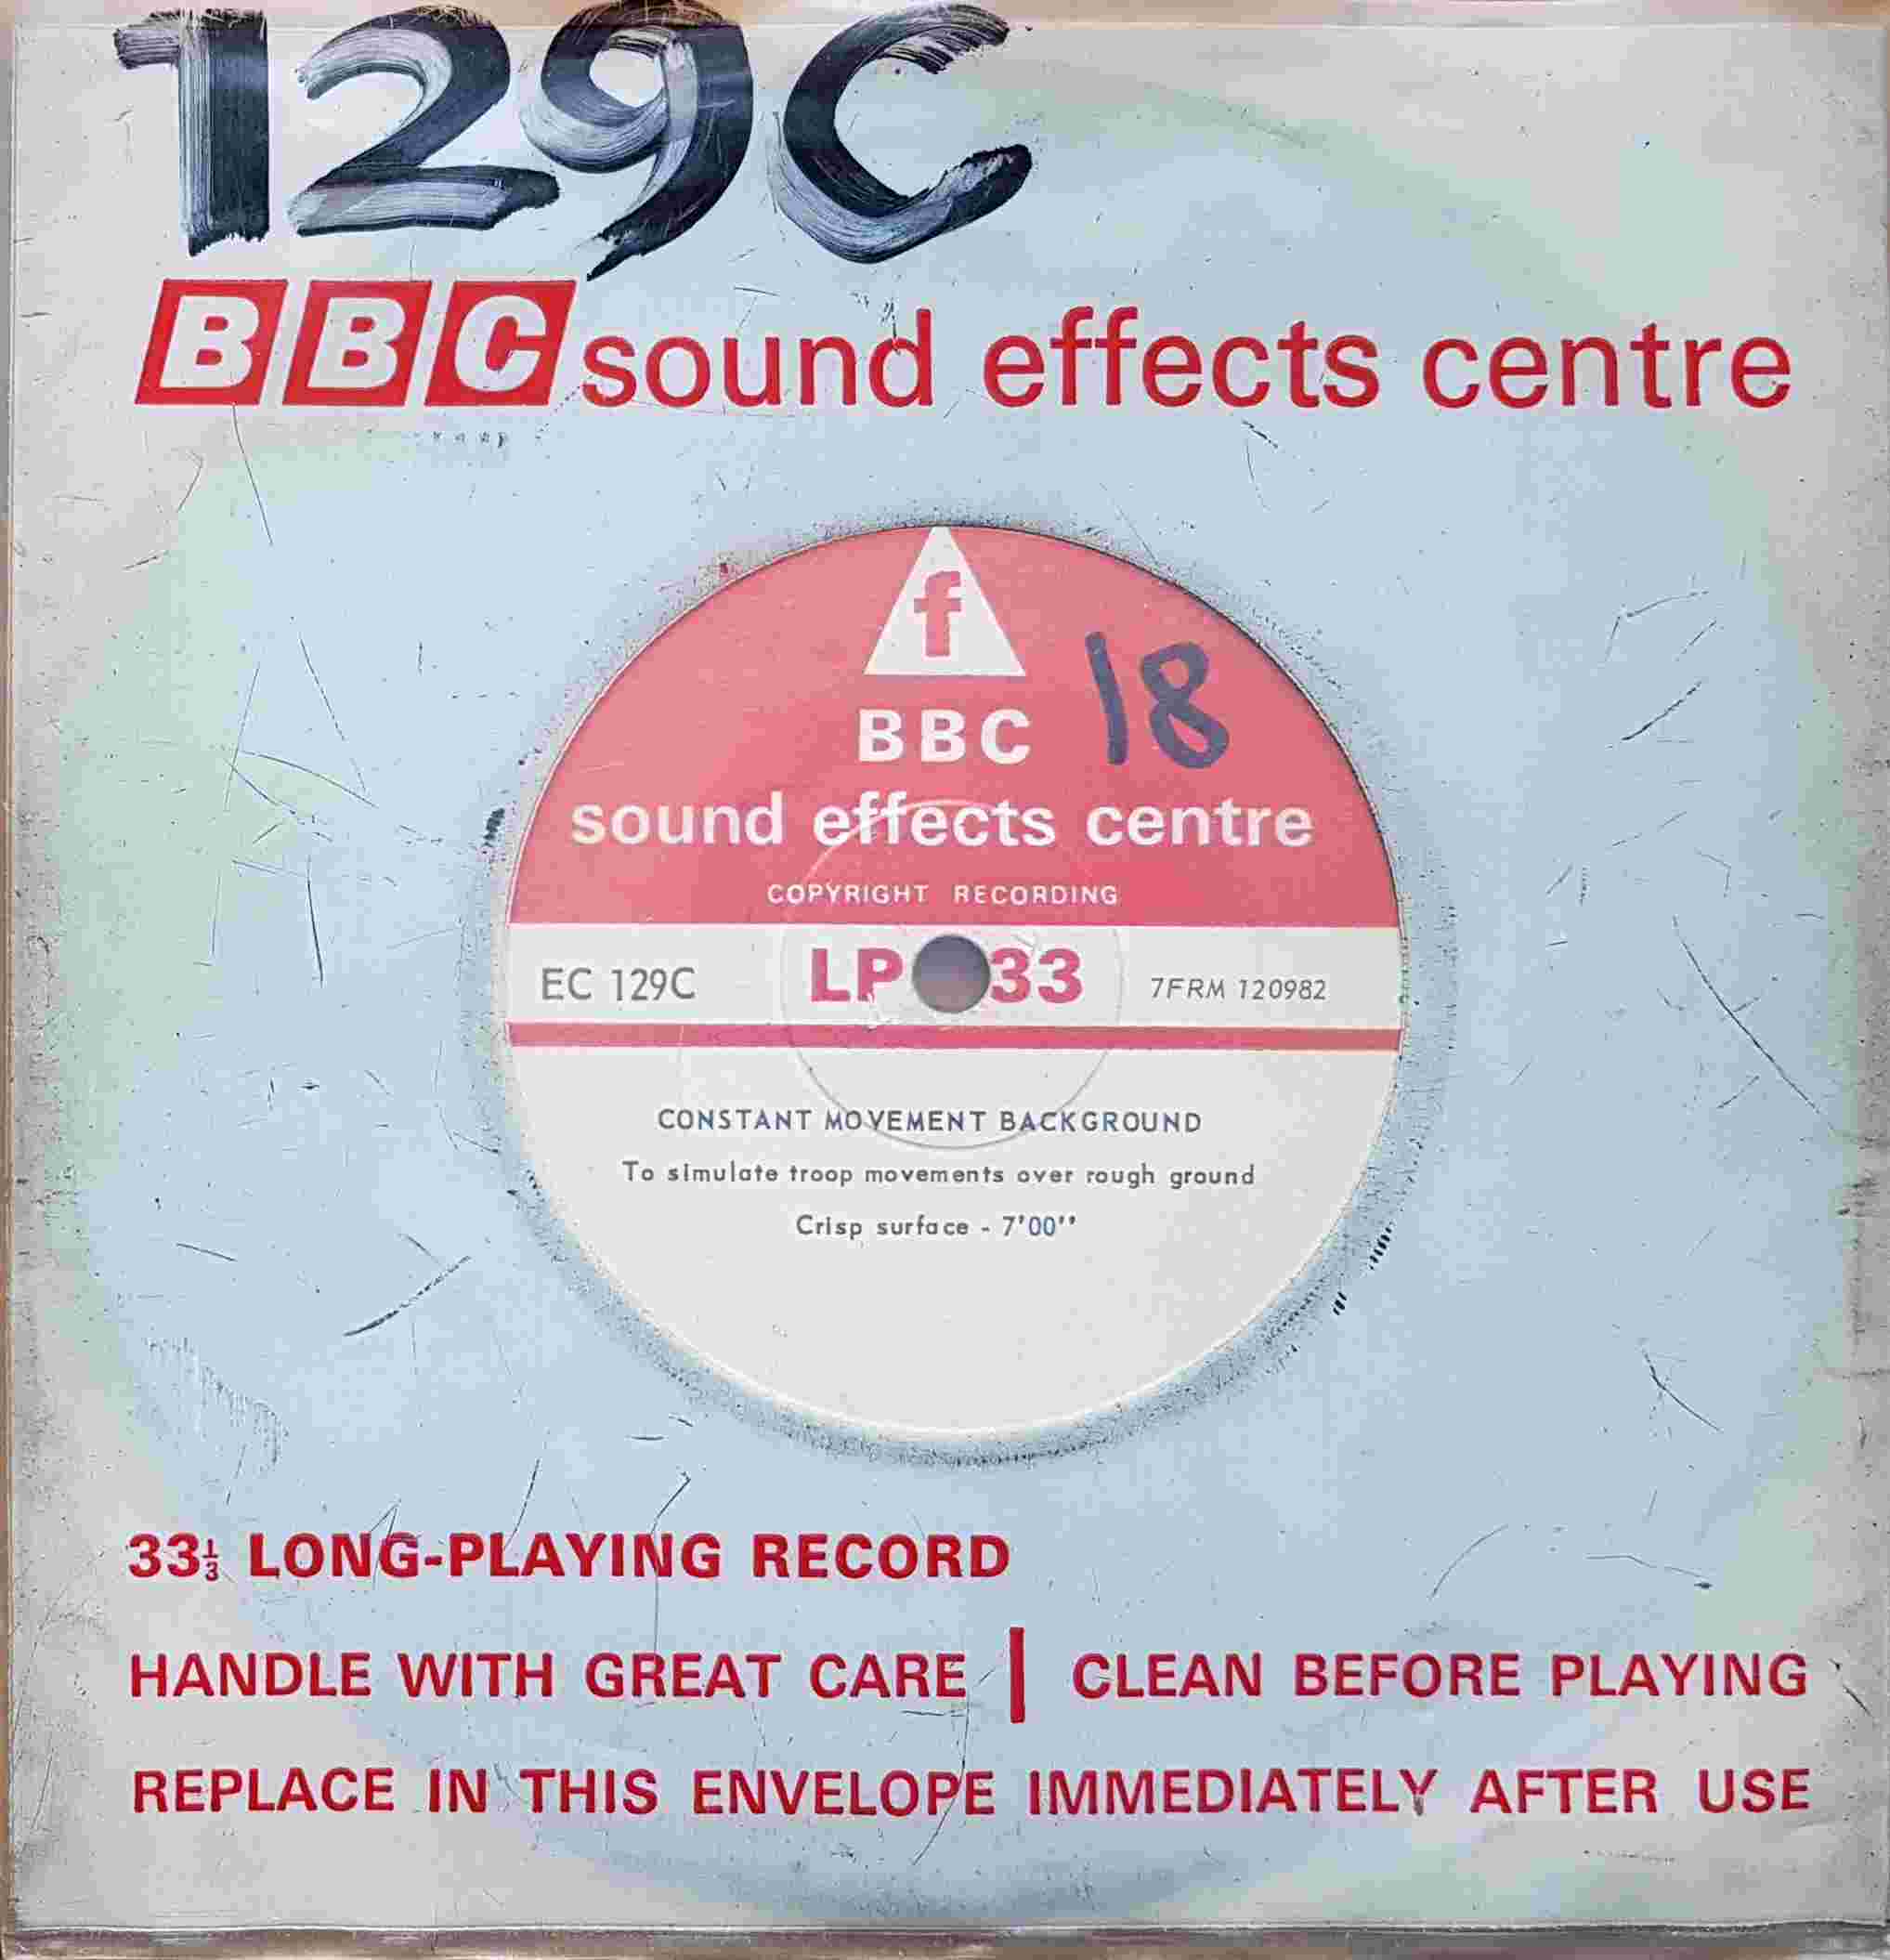 Picture of EC 129C Constant movement background - To simulate troop movement over rough ground by artist Not registered from the BBC records and Tapes library